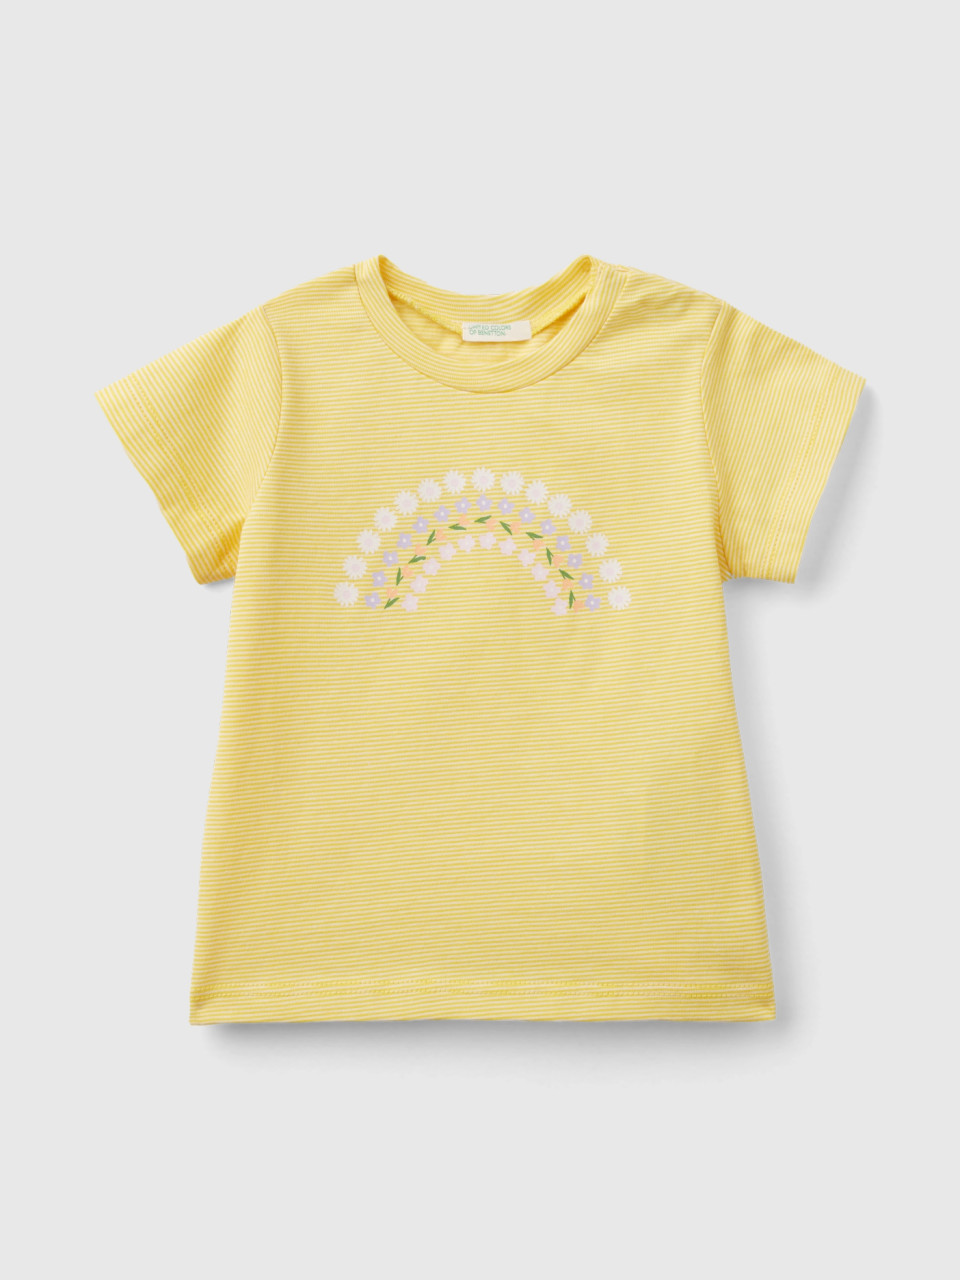 Benetton, T-shirt With Print On Front And Back, Yellow, Kids